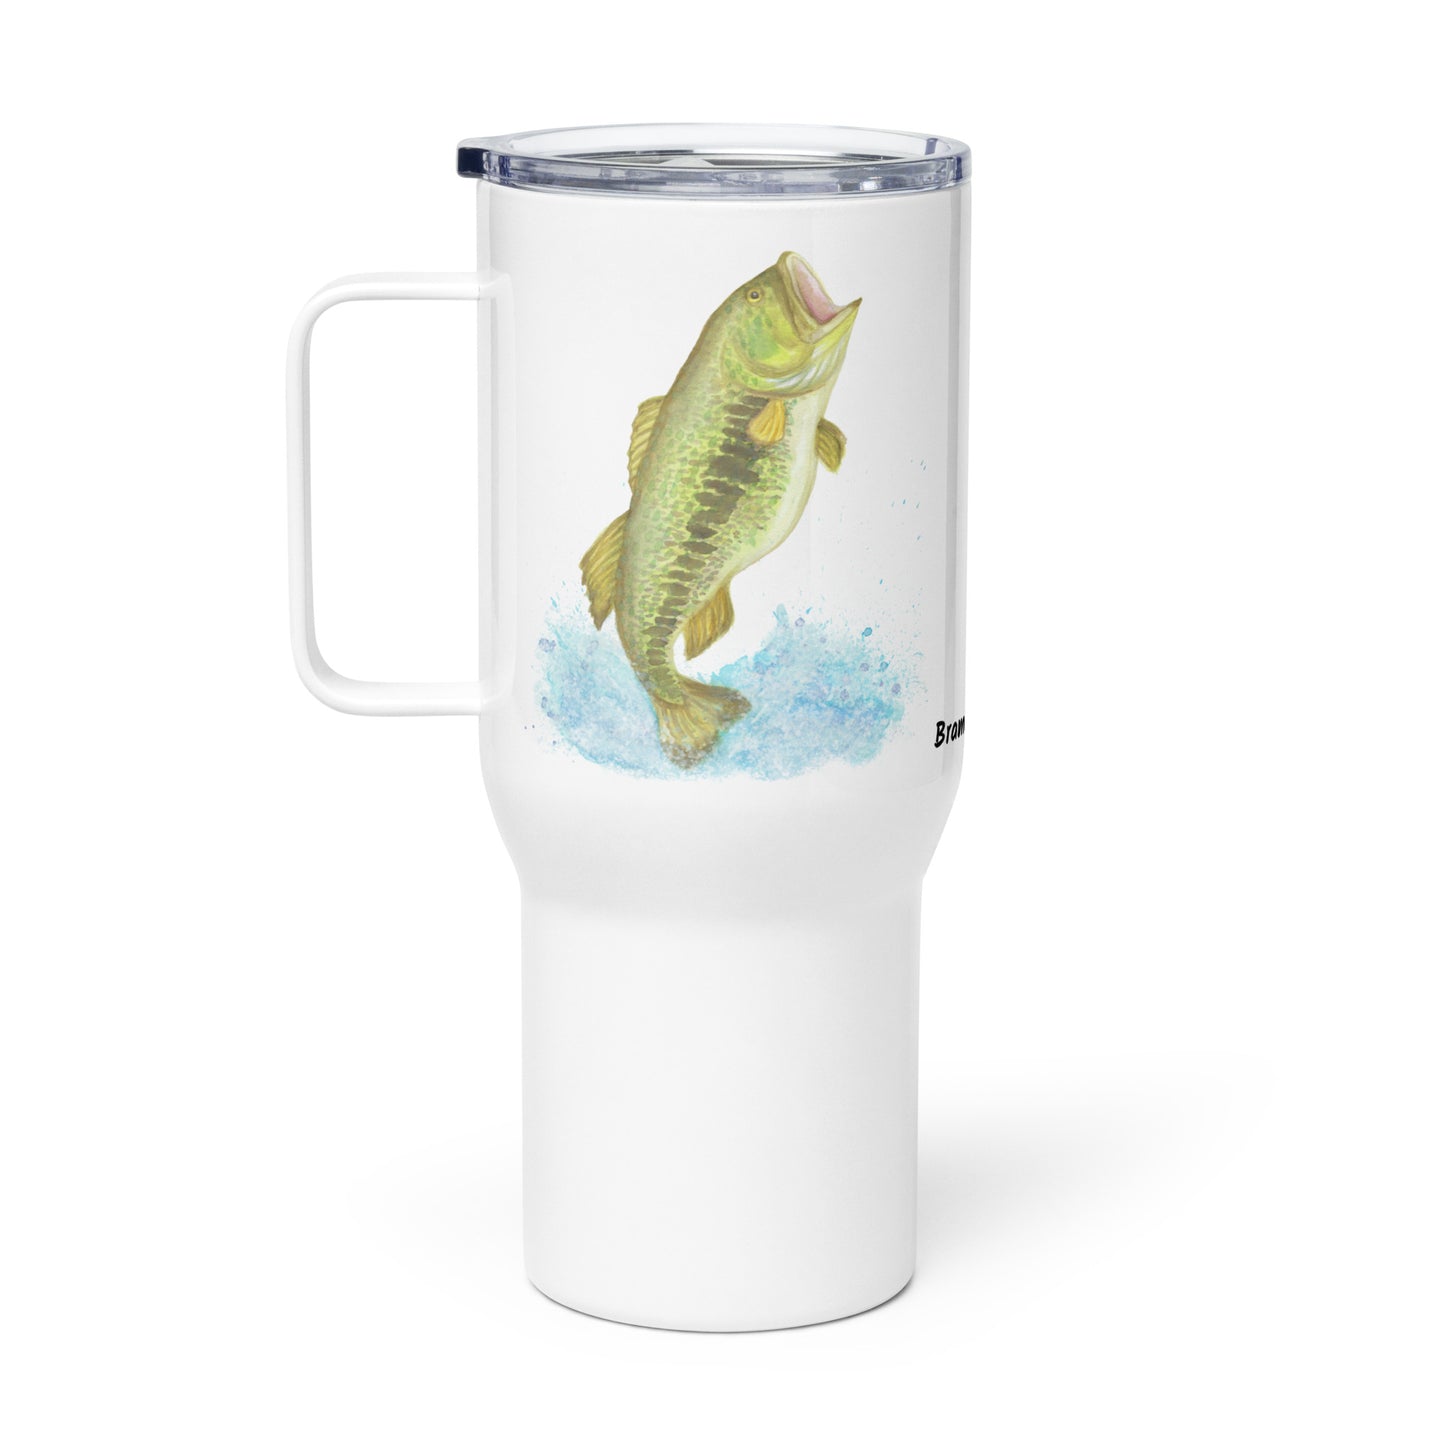 Stainless steel travel mug with handle. Holds 25 ounces of hot or cold drinks. Has print of watercolor bass fish on both sides. Fits most car cup holders. Comes with spill-proof BPA-free plastic lid.